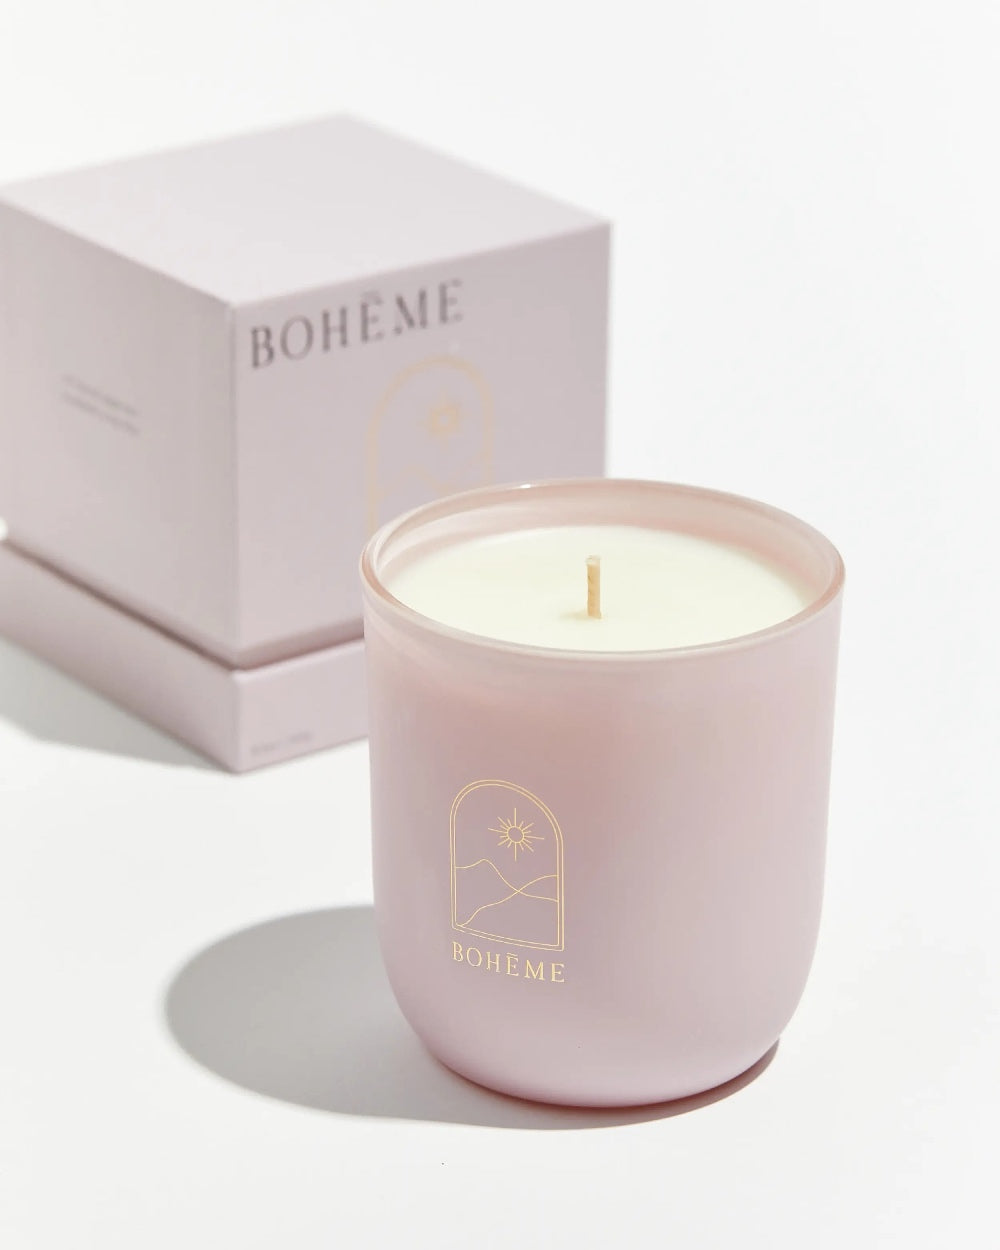 Boheme Fragrances Notting Hill Candle sitting in front of it's box on a white background